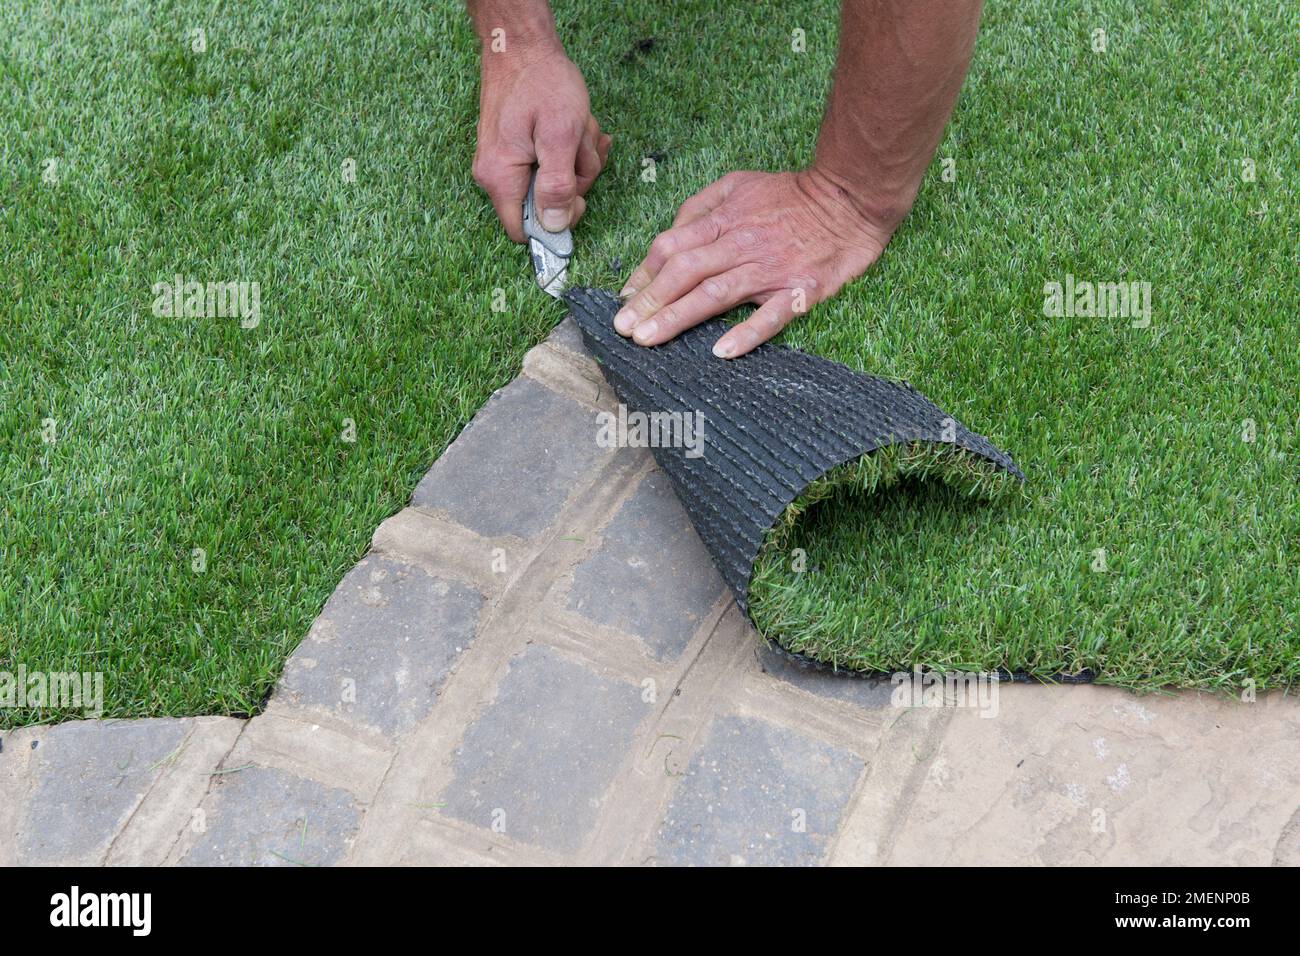 Trimming artificial turf to size using a stanley knife Stock Photo